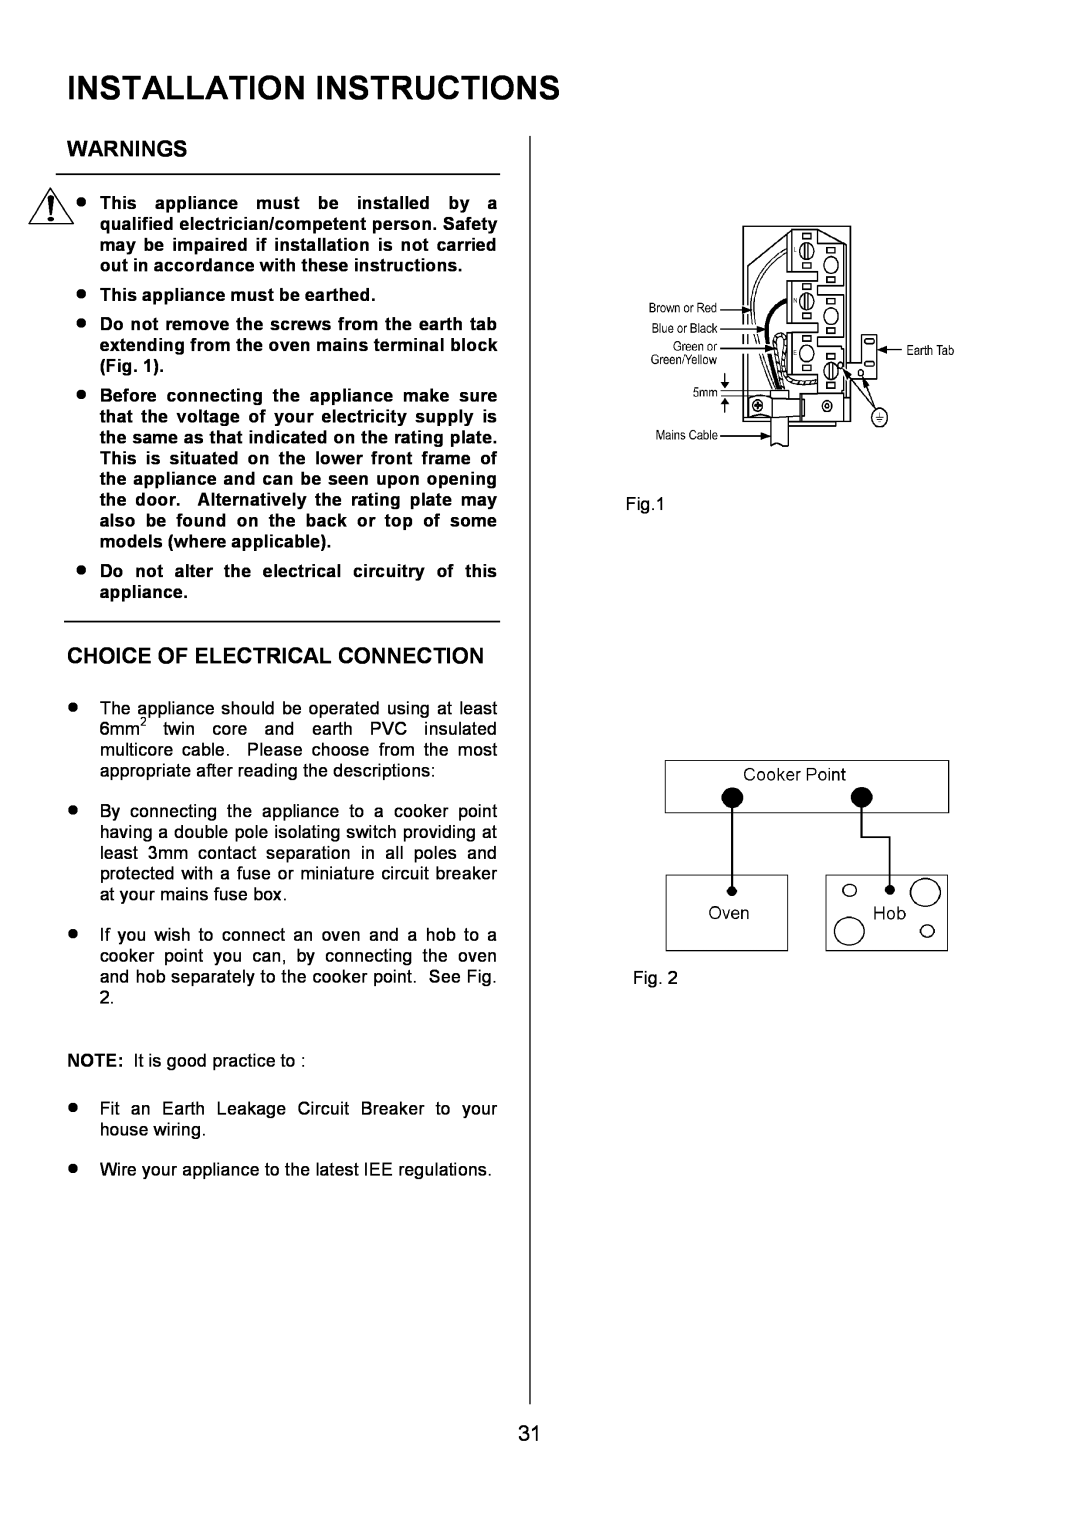 Electrolux U3100-4 Installation Instructions, Warnings, Choice Of Electrical Connection, This appliance must be earthed 